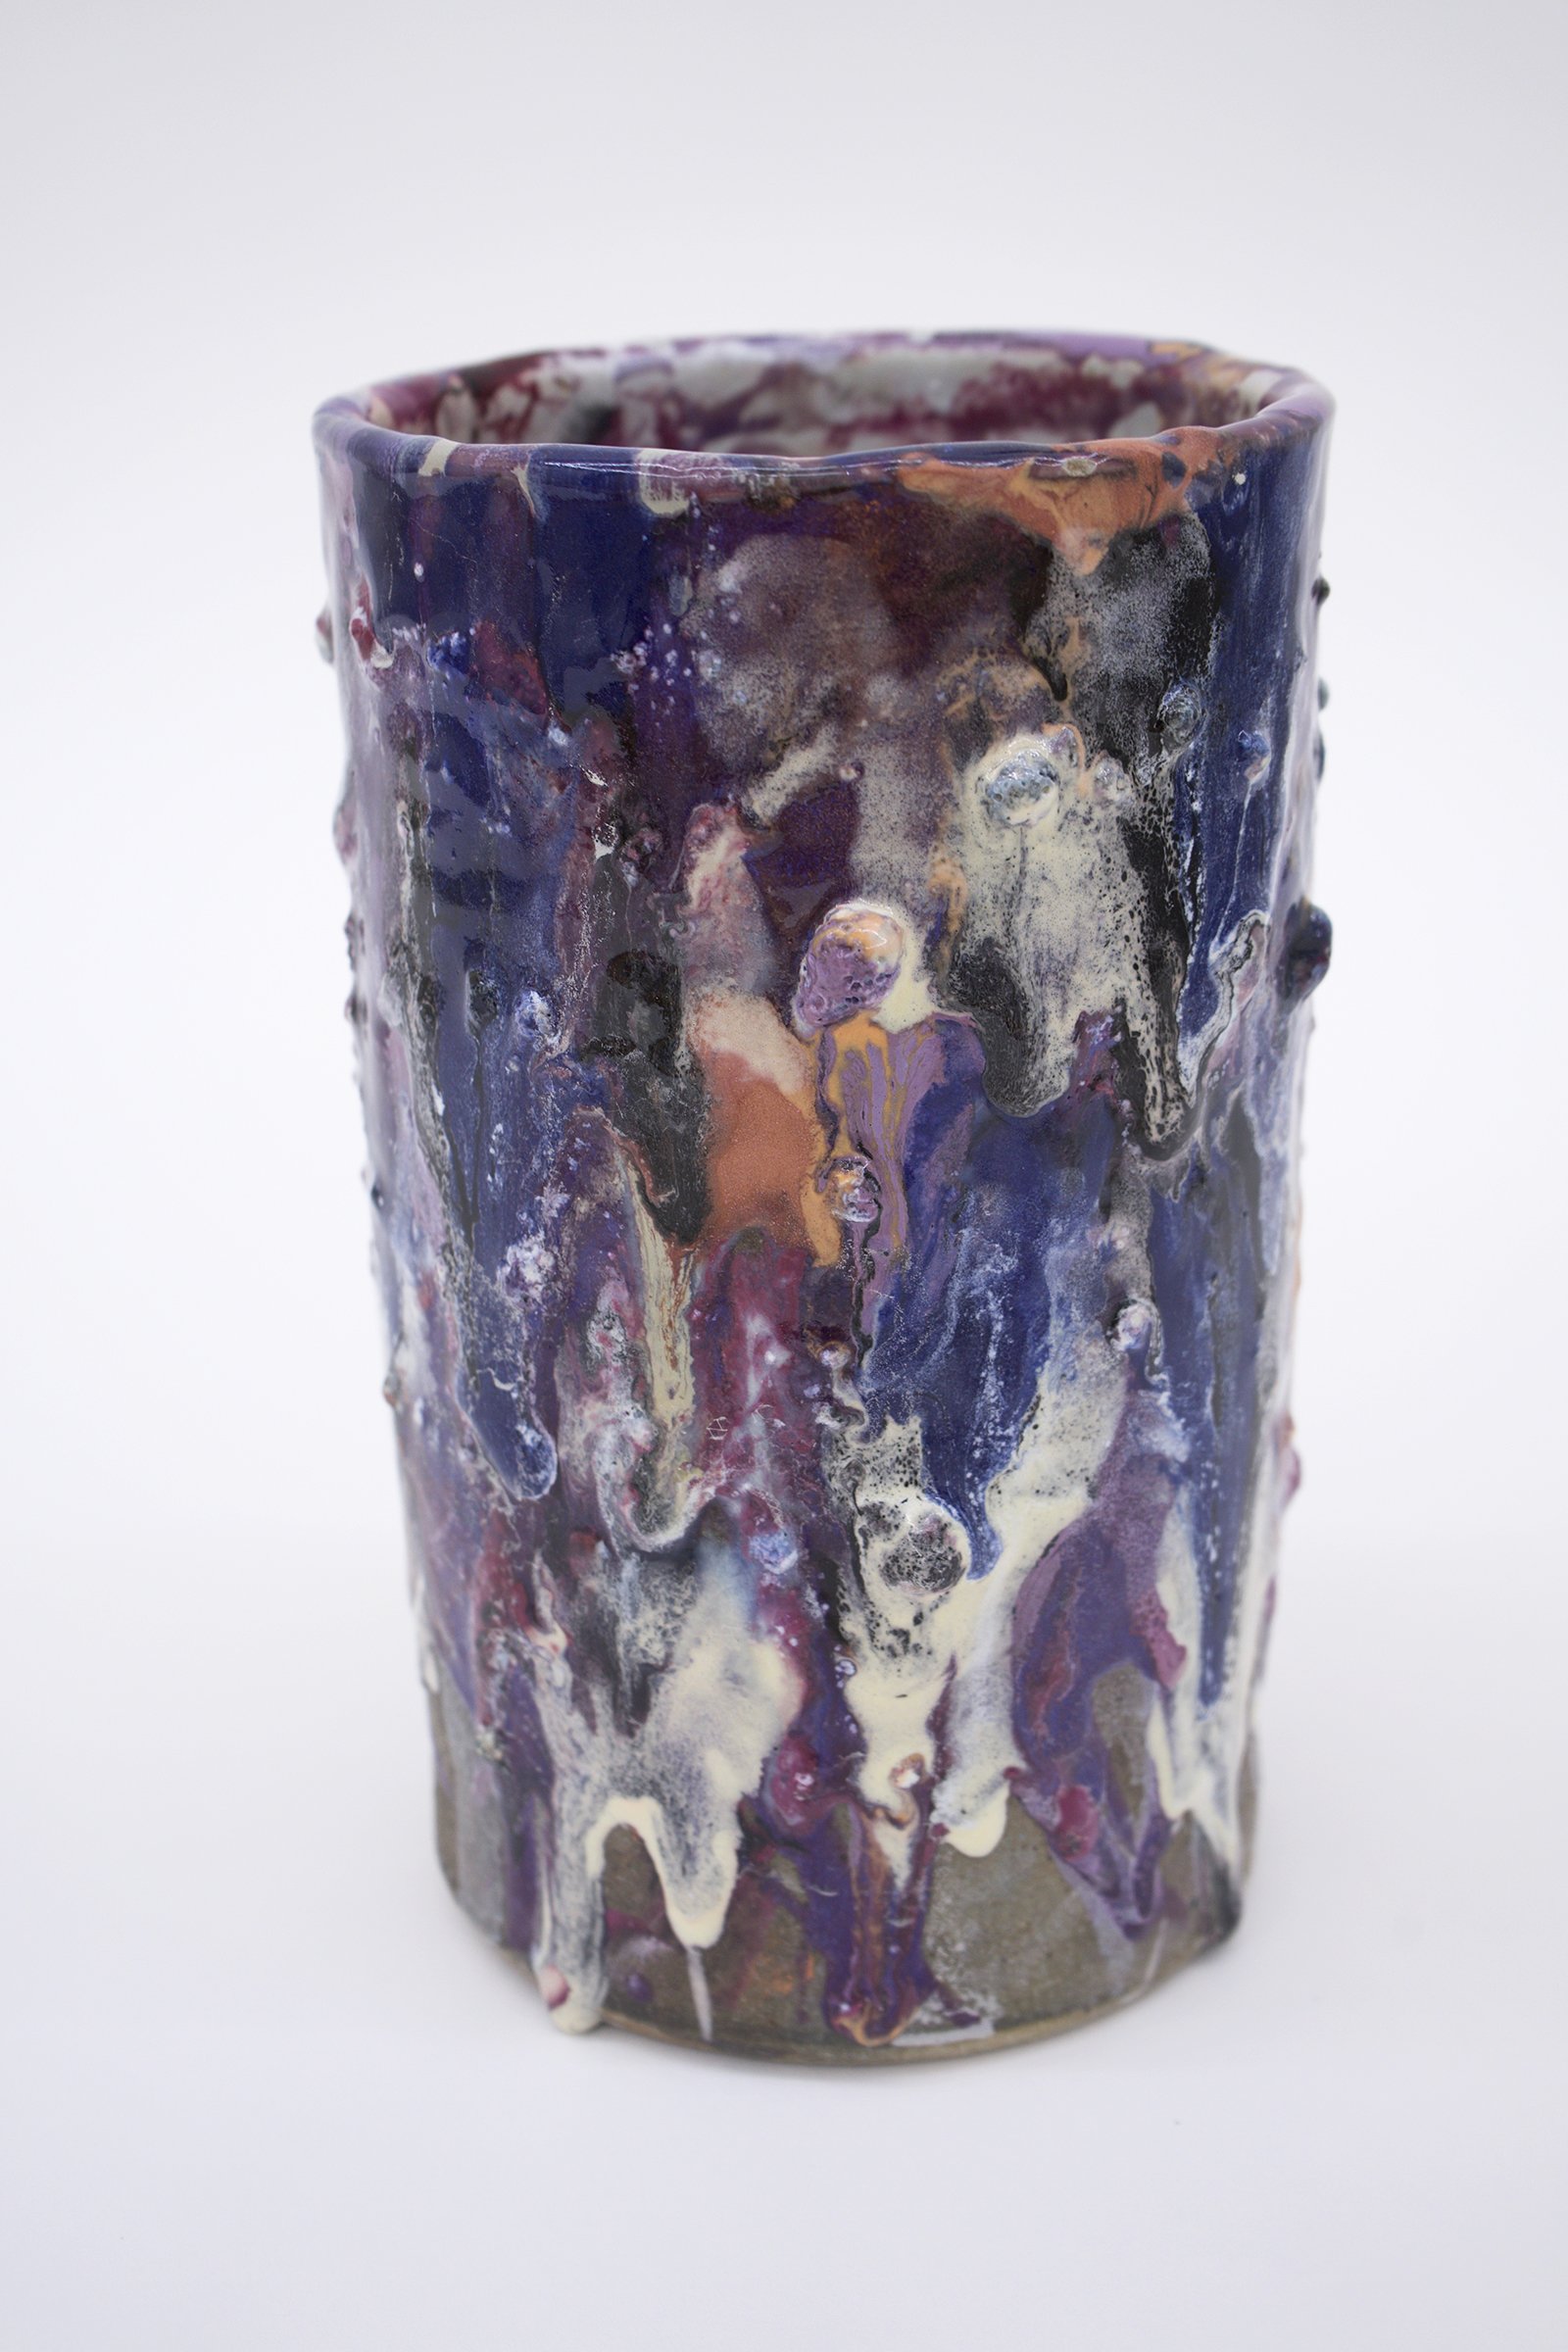   Untitled (Lava Lamps, Cylinder 1) , 2022 Multiply fired and layered glazes on stoneware 8.5” x 5” 